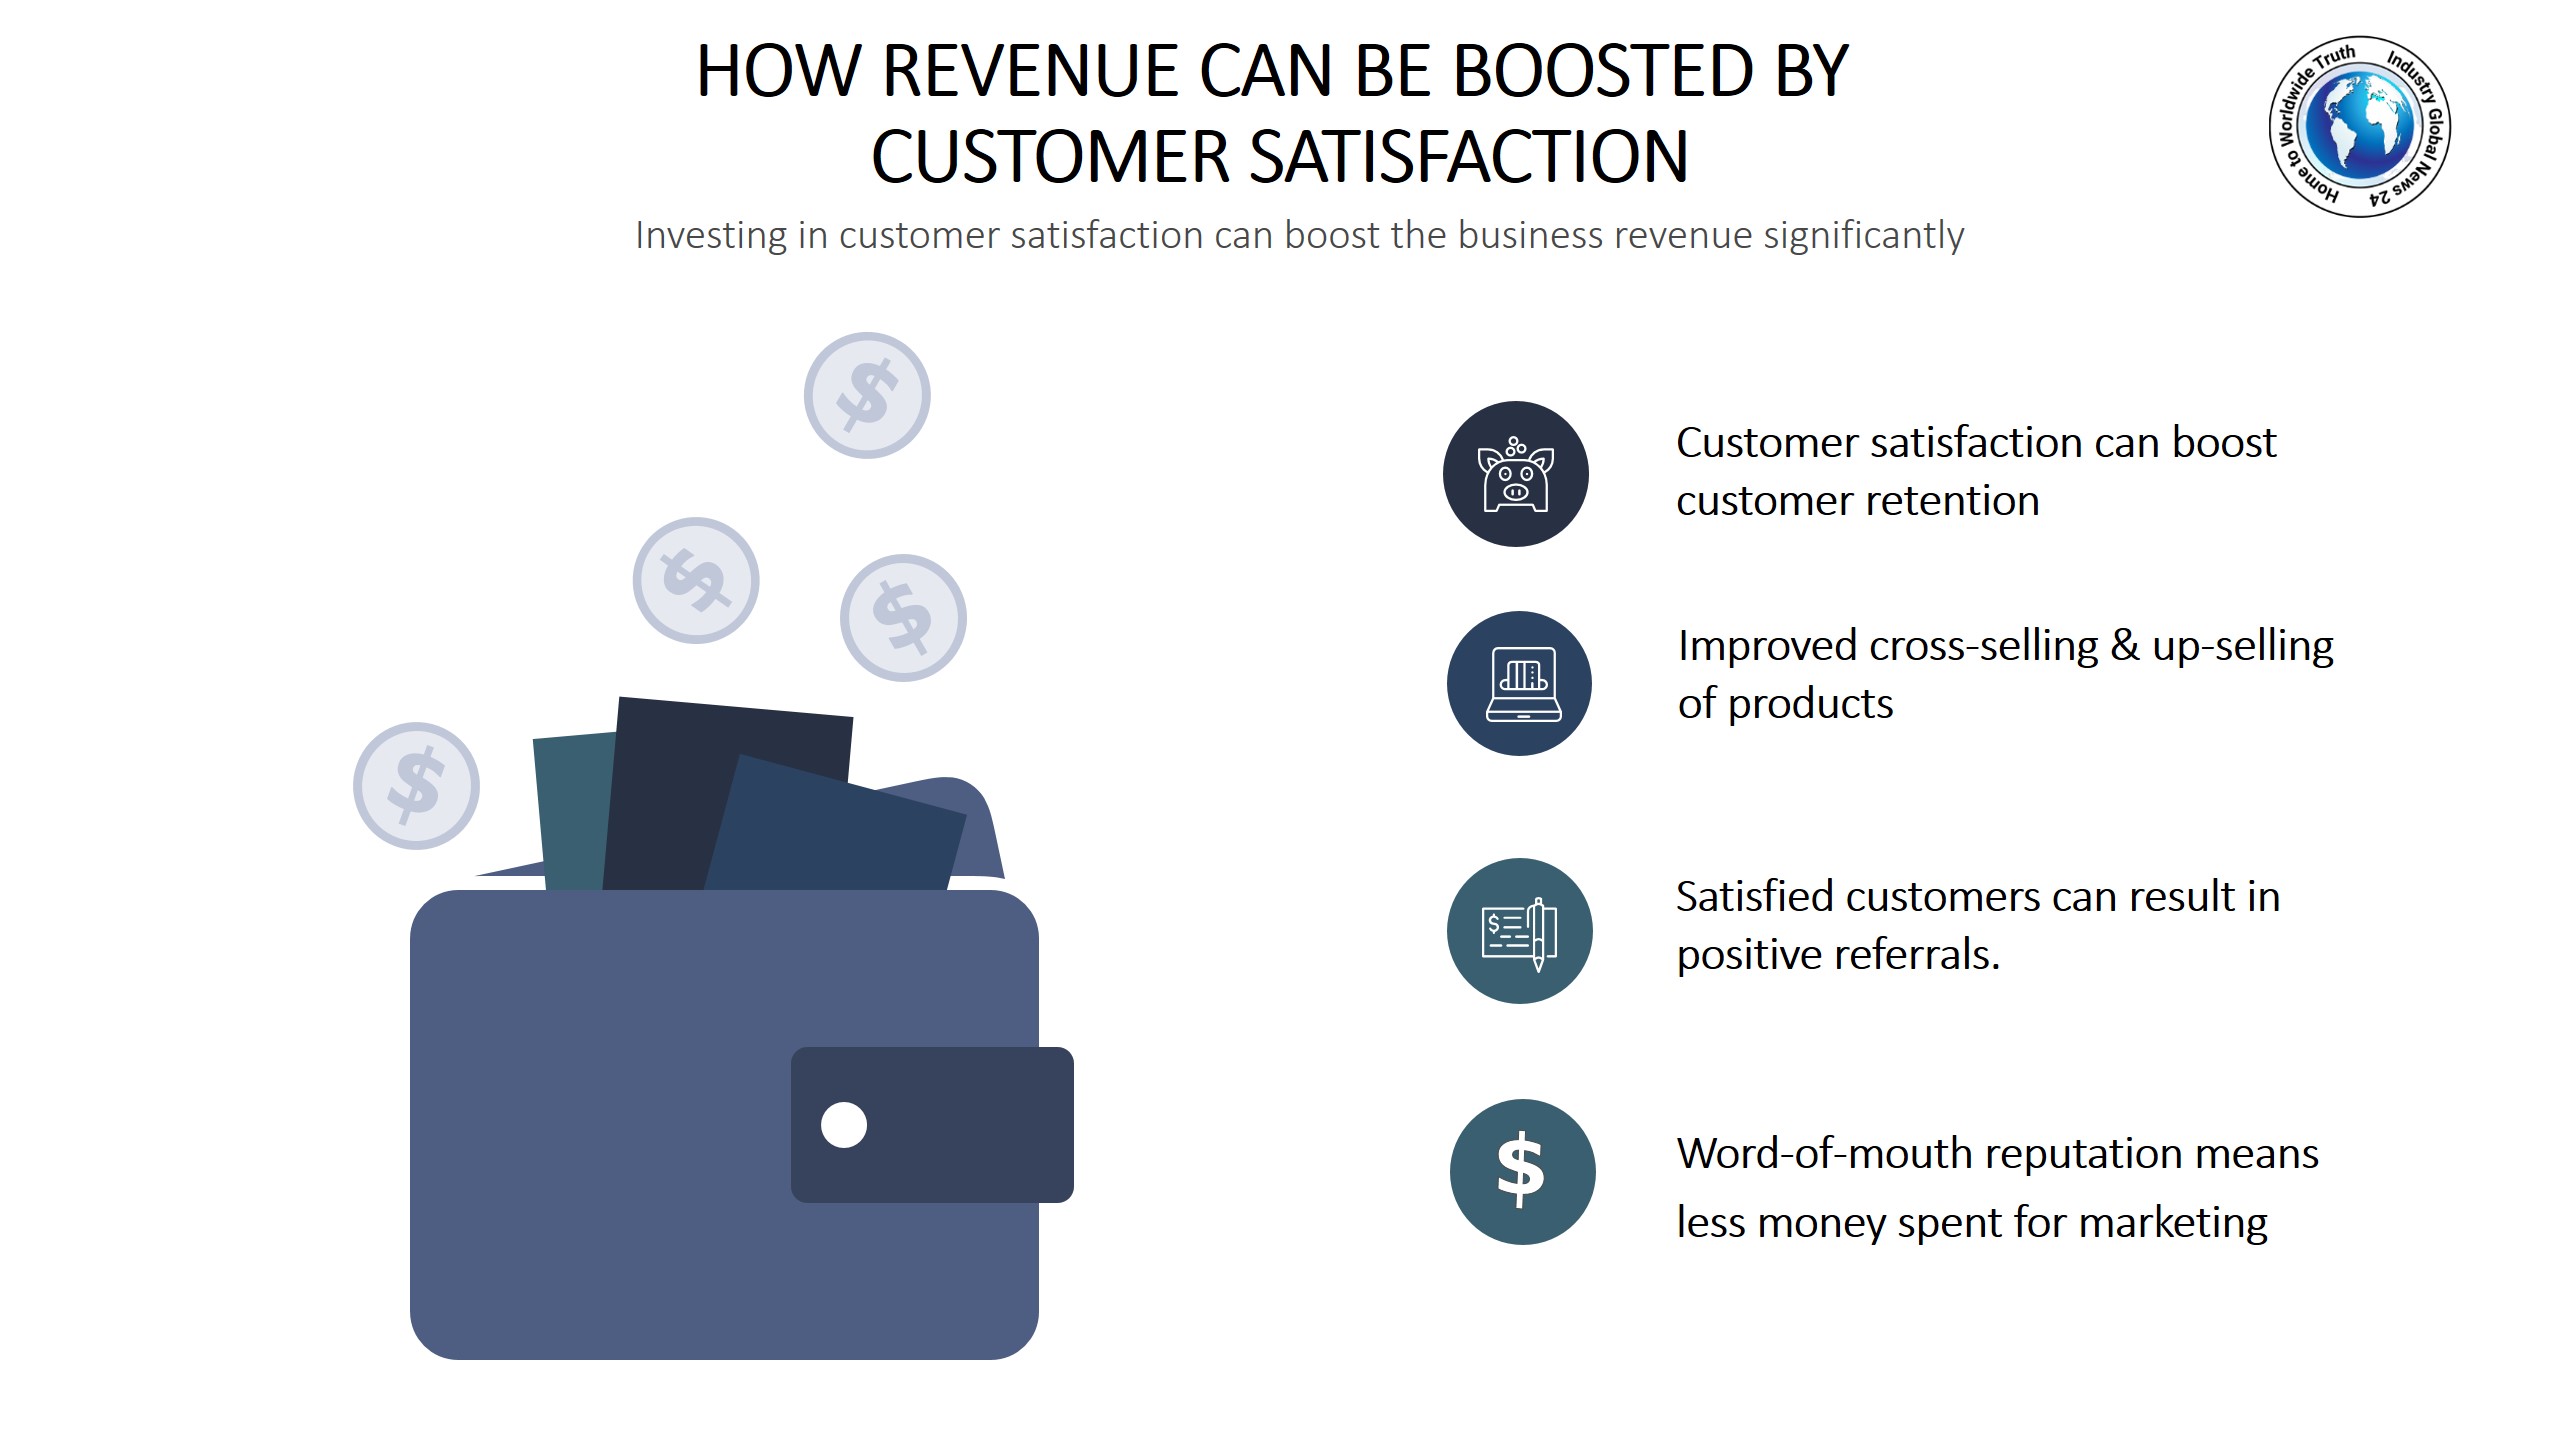 How revenue can be boosted by customer satisfaction